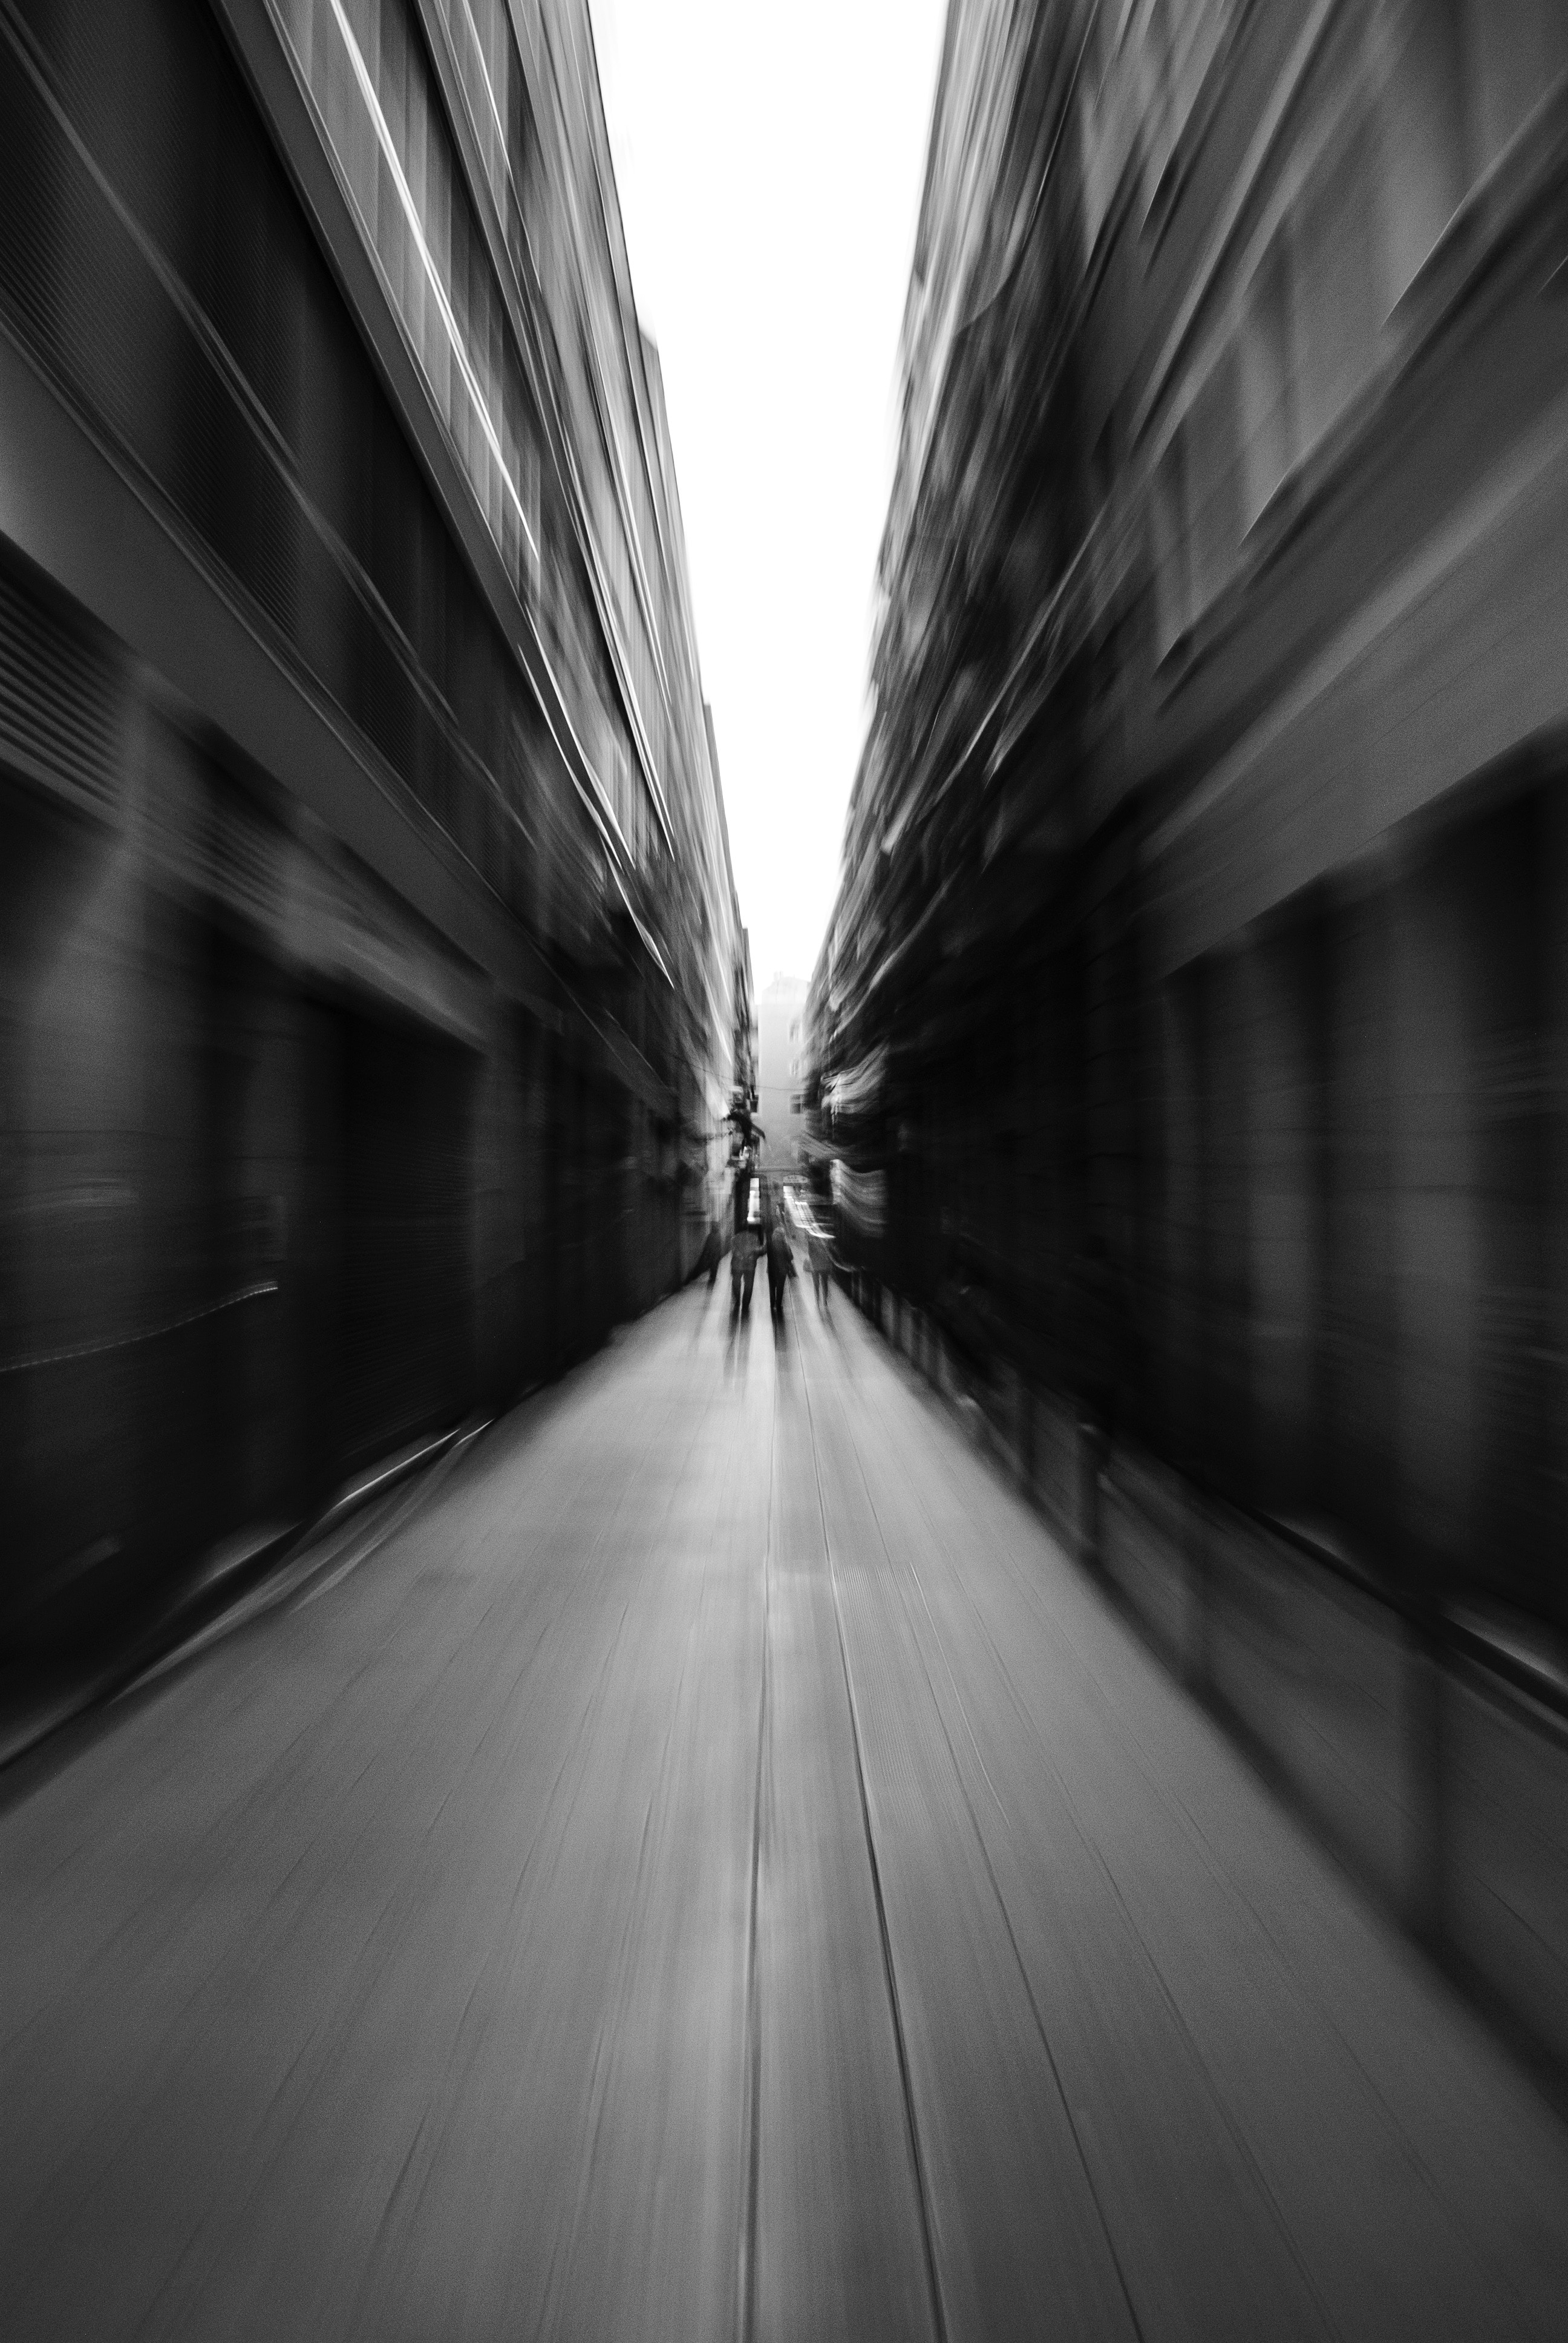 bw, chb, blur, perspective, building, miscellanea, miscellaneous, traffic, movement, smooth, street, prospect iphone wallpaper